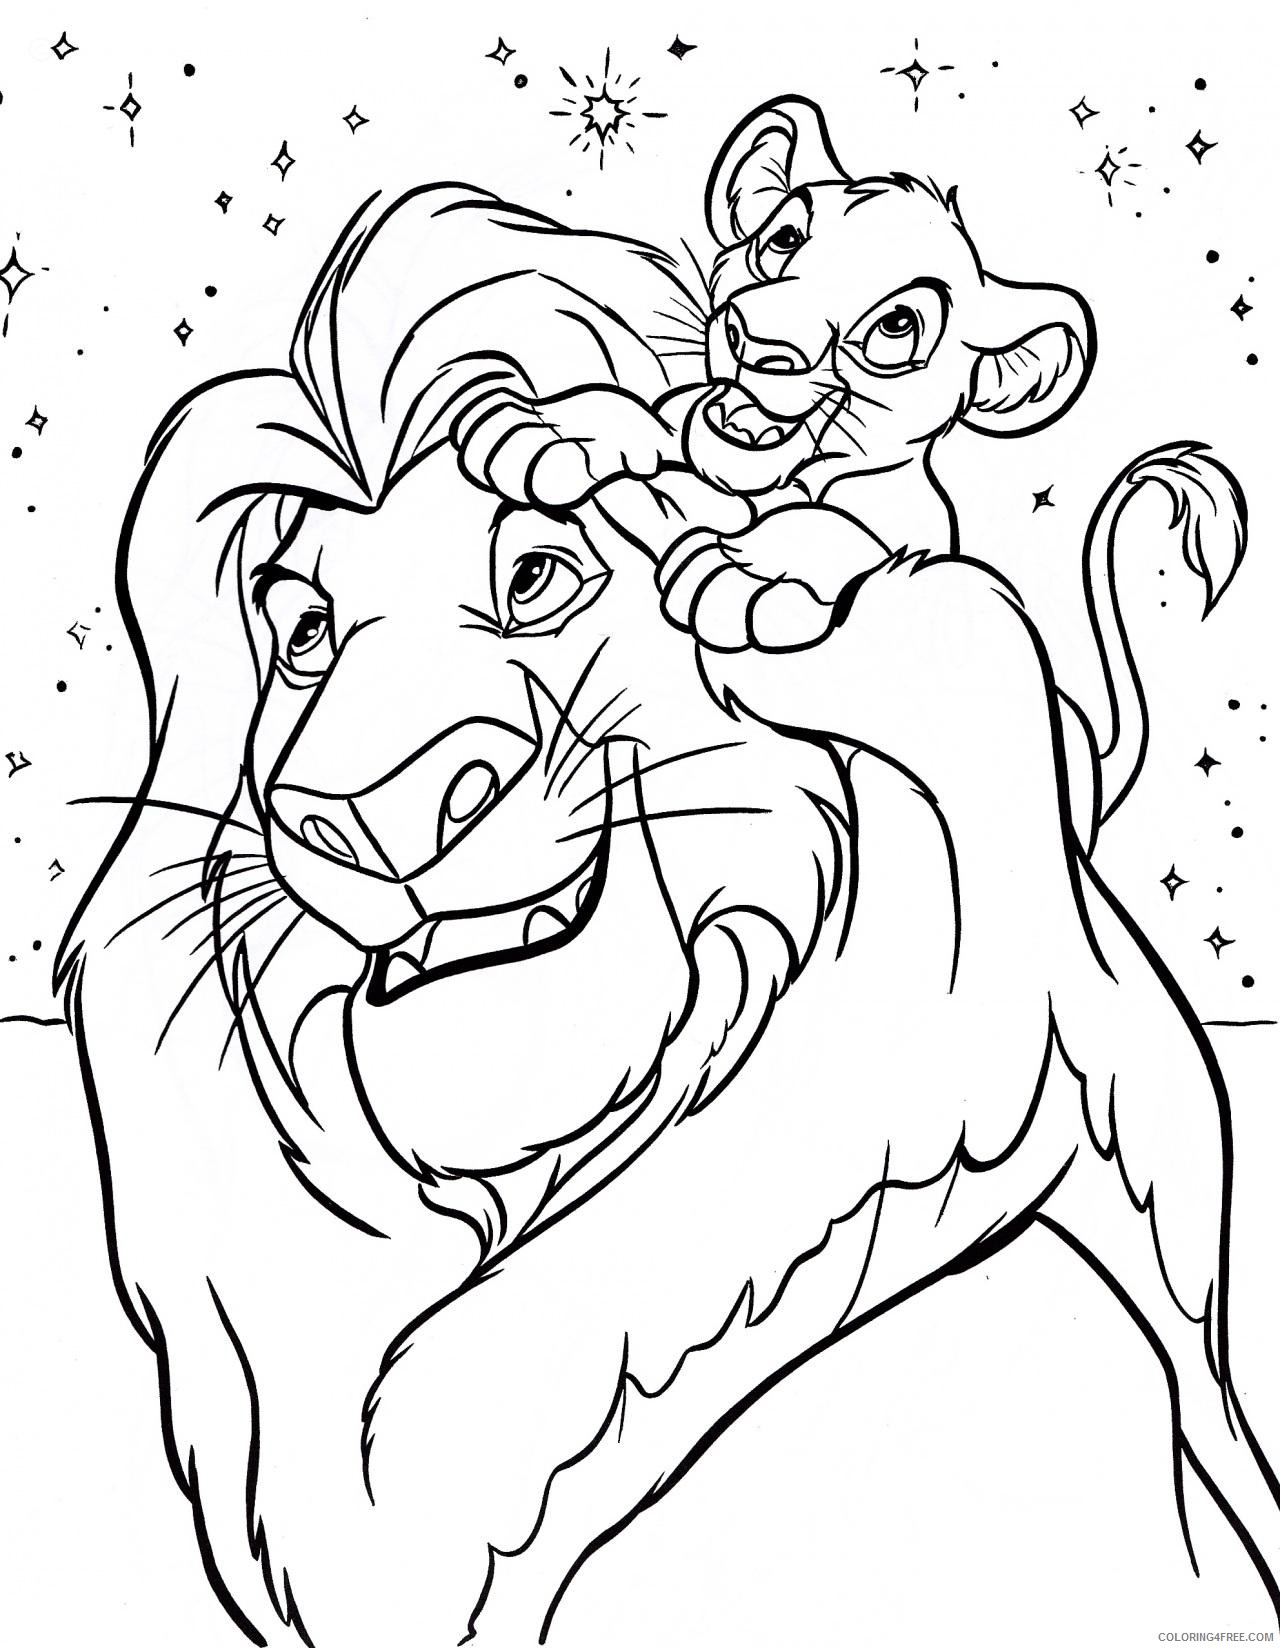 disney coloring pages the lion king Coloring4free